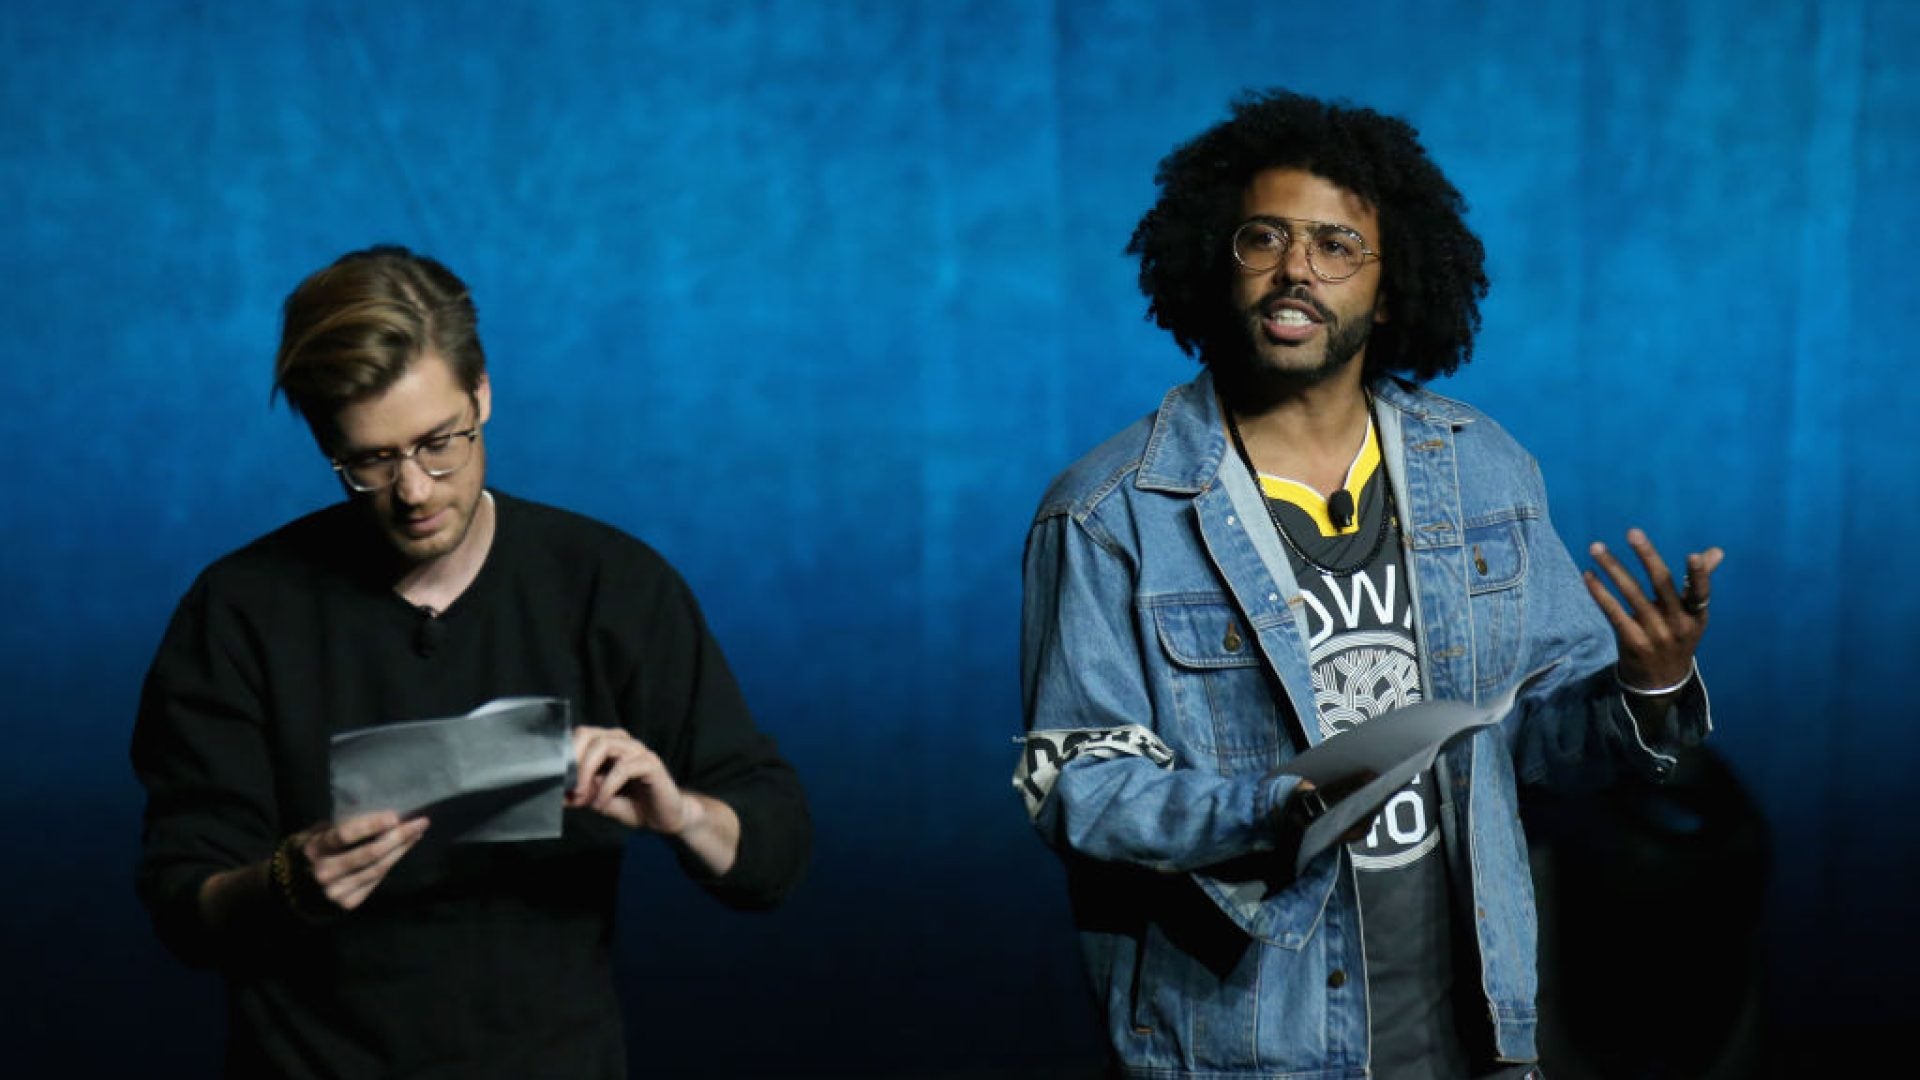 When Art Meets Activism: Daveed Diggs And Rafael Casal Discuss How Social Justice Impacts Their Work